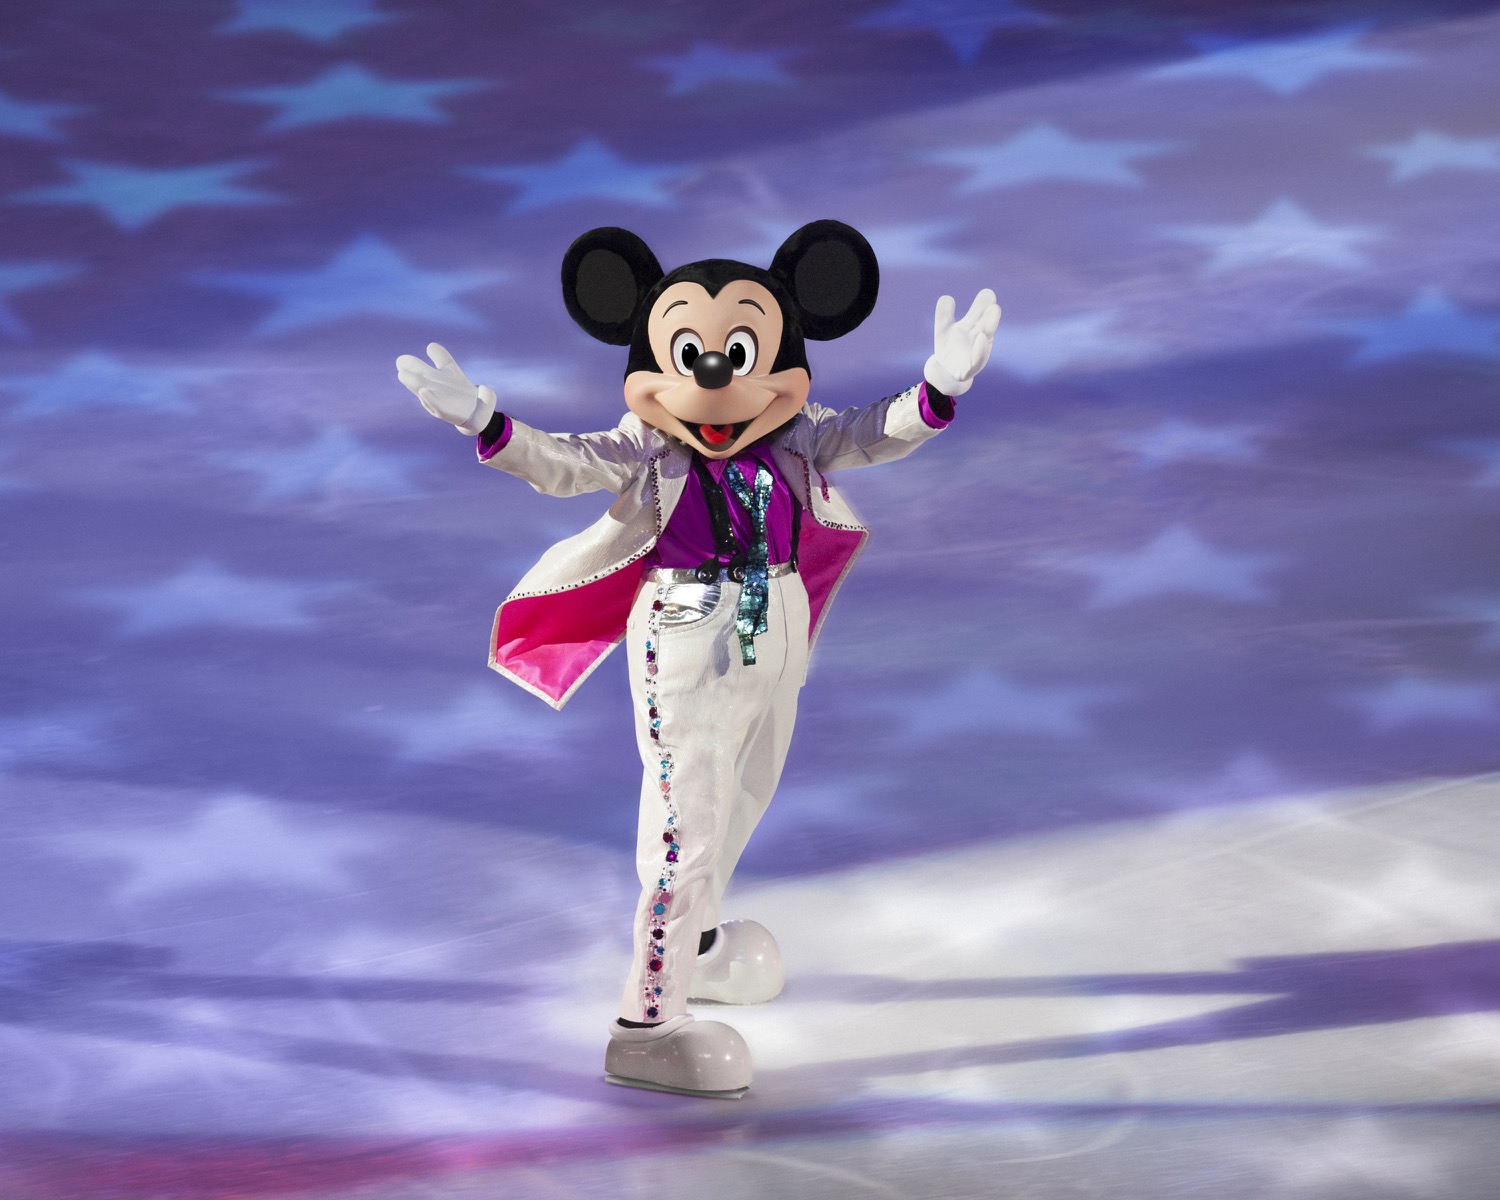 Don't Miss This Year's Disney On Ice At U.S. Bank Arena Cincinnati